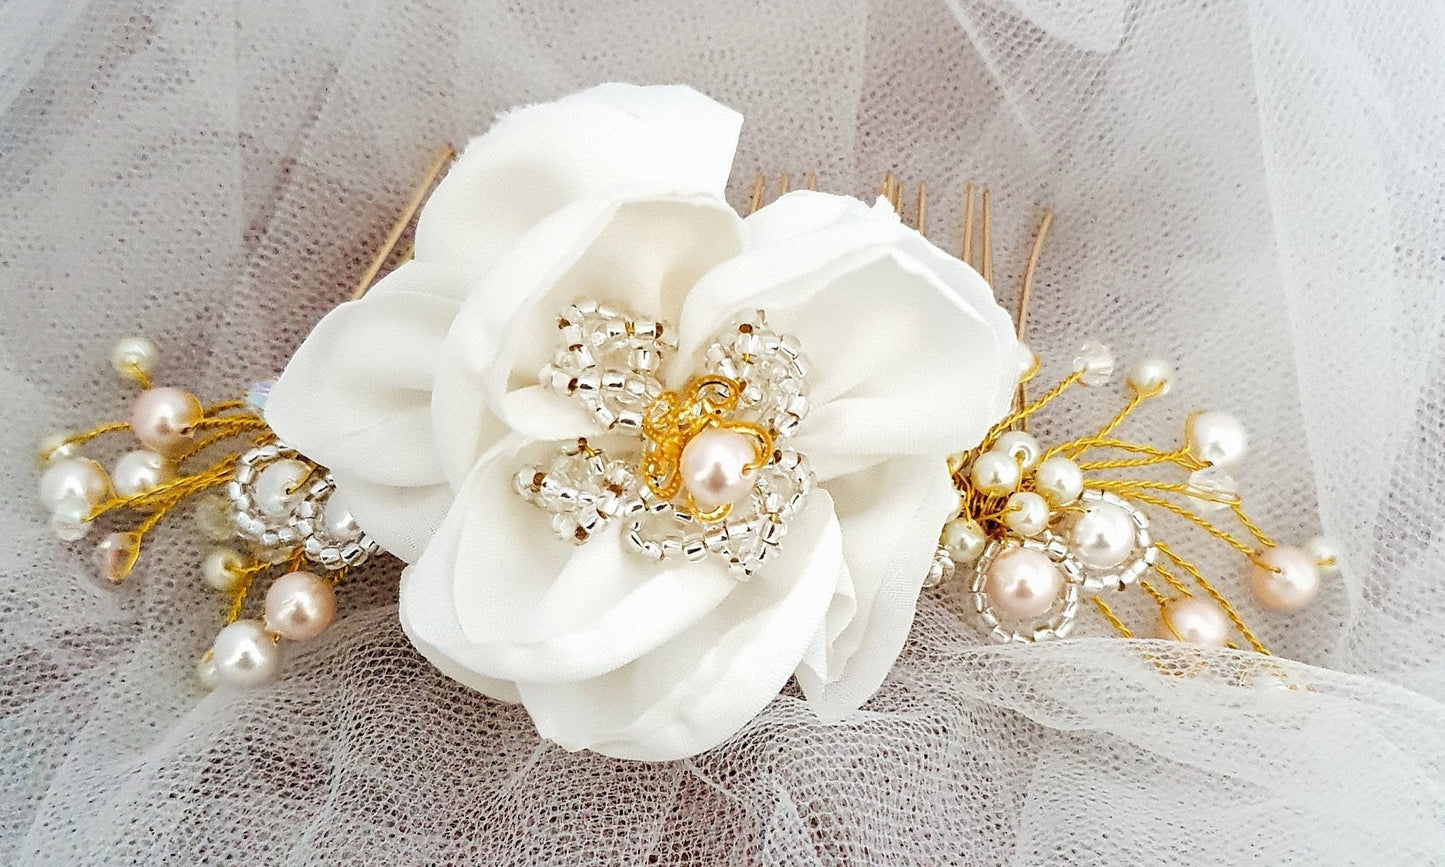 Bridal comb with silk flower and pearls - Handmade with pearls, beads, elegant hair accessory, comb for wedding, special events